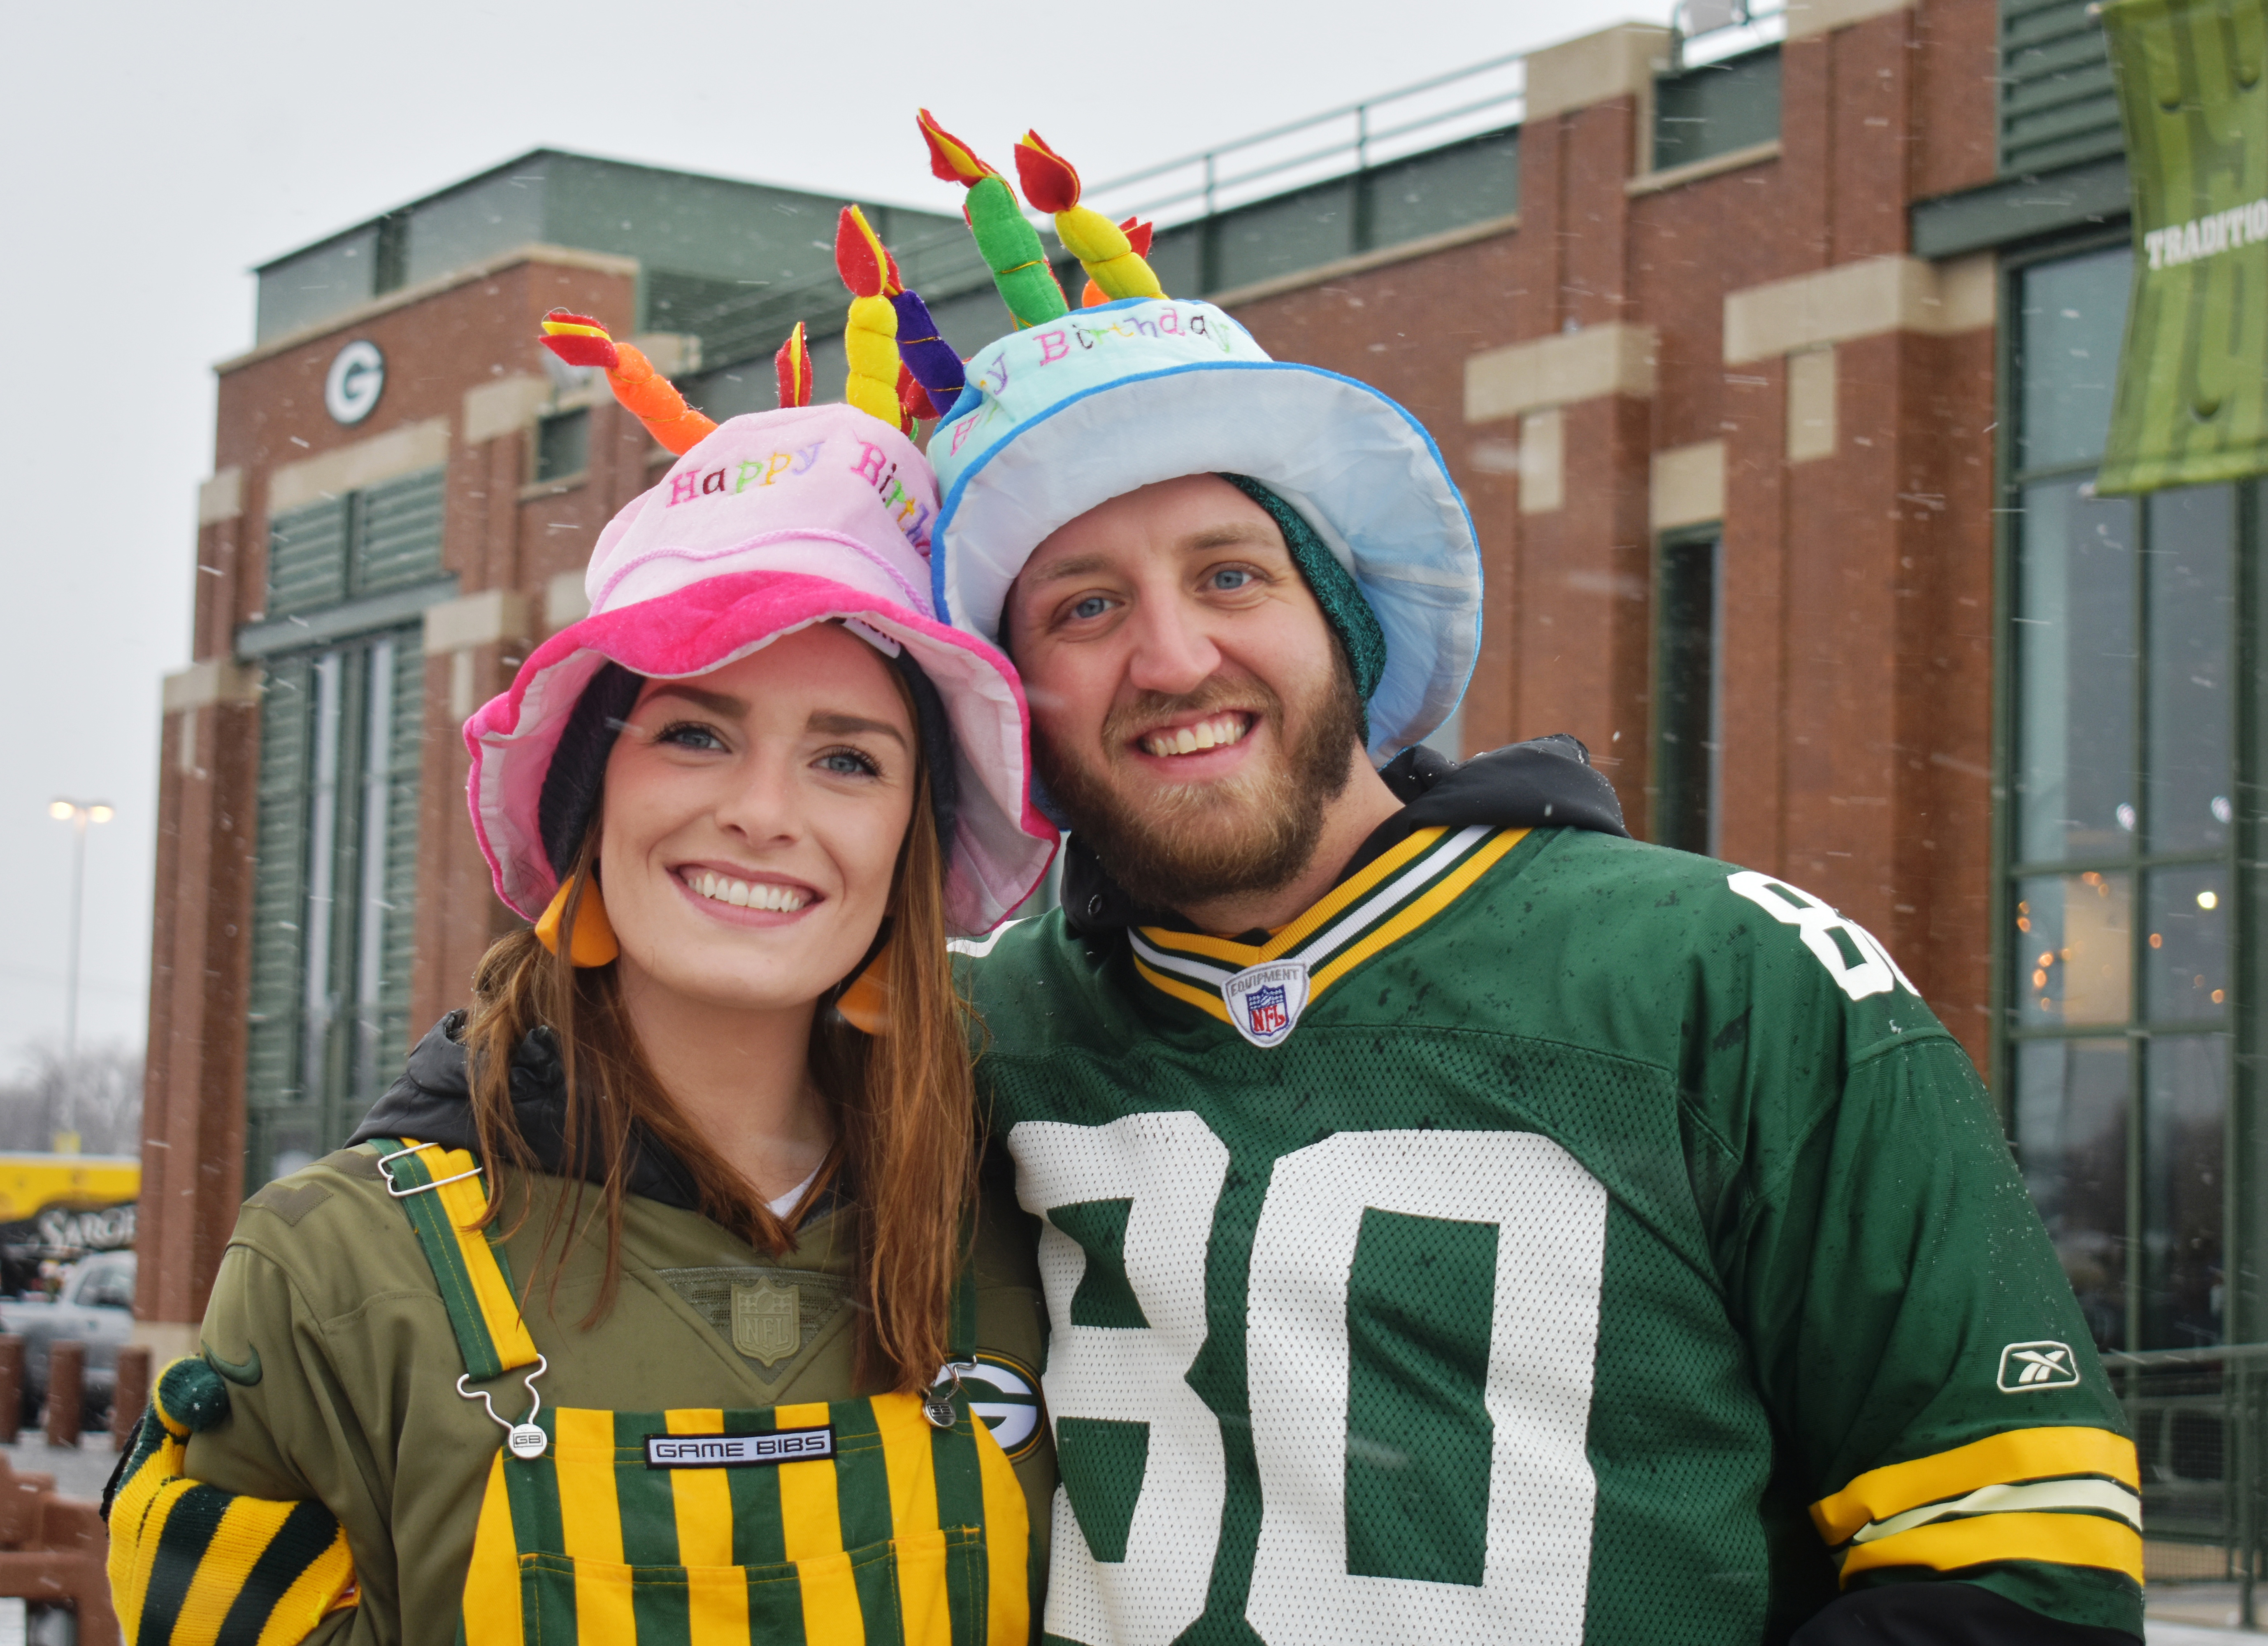 green bay packers game day hats